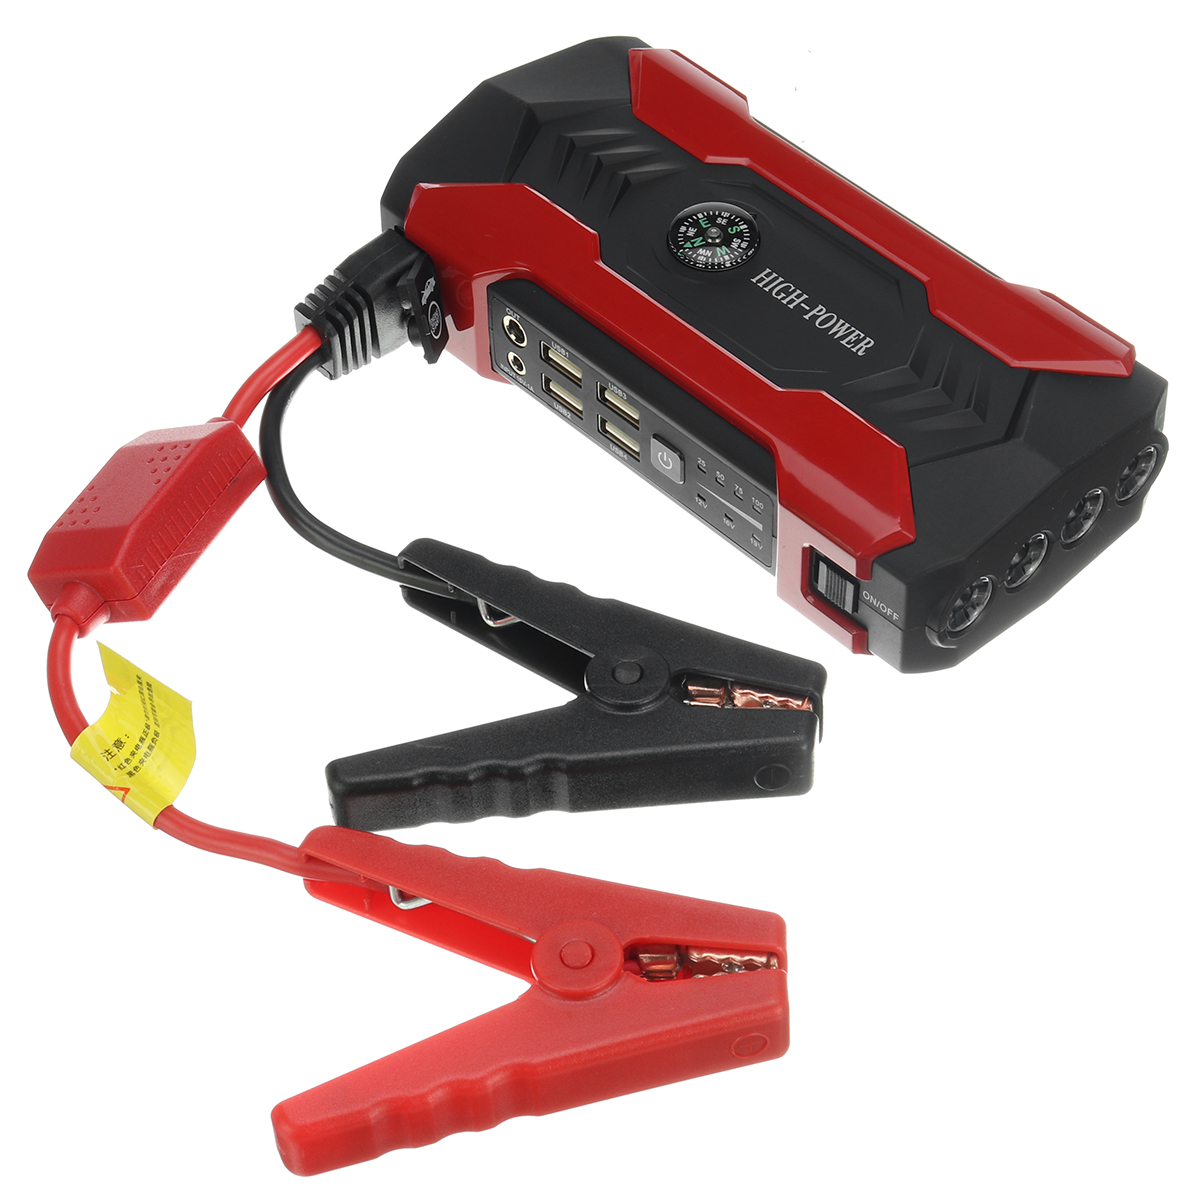 12V-Car-Jump-Starter-Battery-Booster-4USB-LED-Emergency-Auto-Quick-Charge-Power-Bank-1843625-5